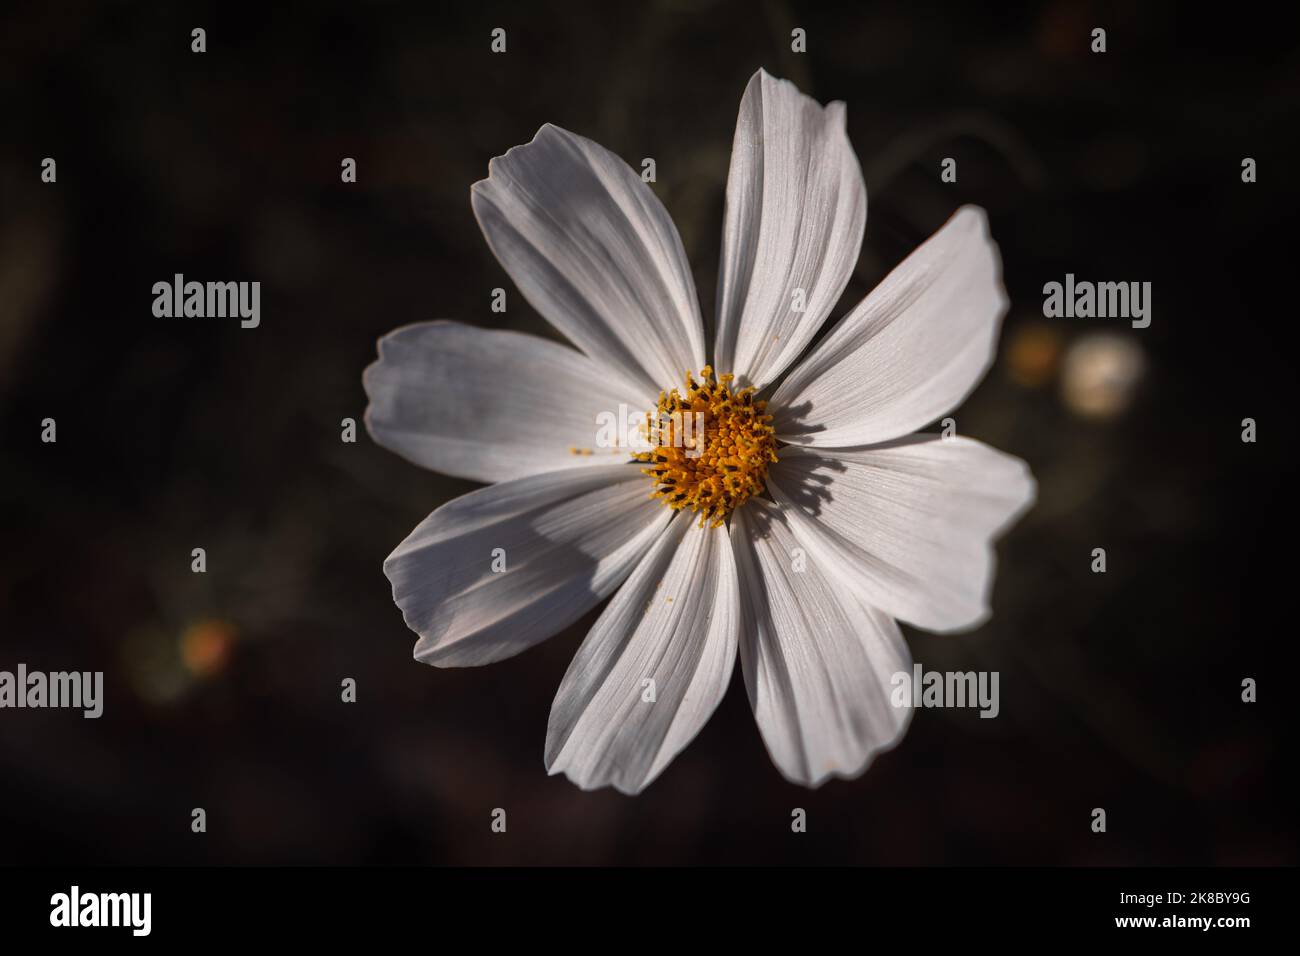 Close-up of Sonata White or Cosmos Bipinnatus in bloom illuminated by sunlight against a dark blurred background. Flower macro photography Stock Photo